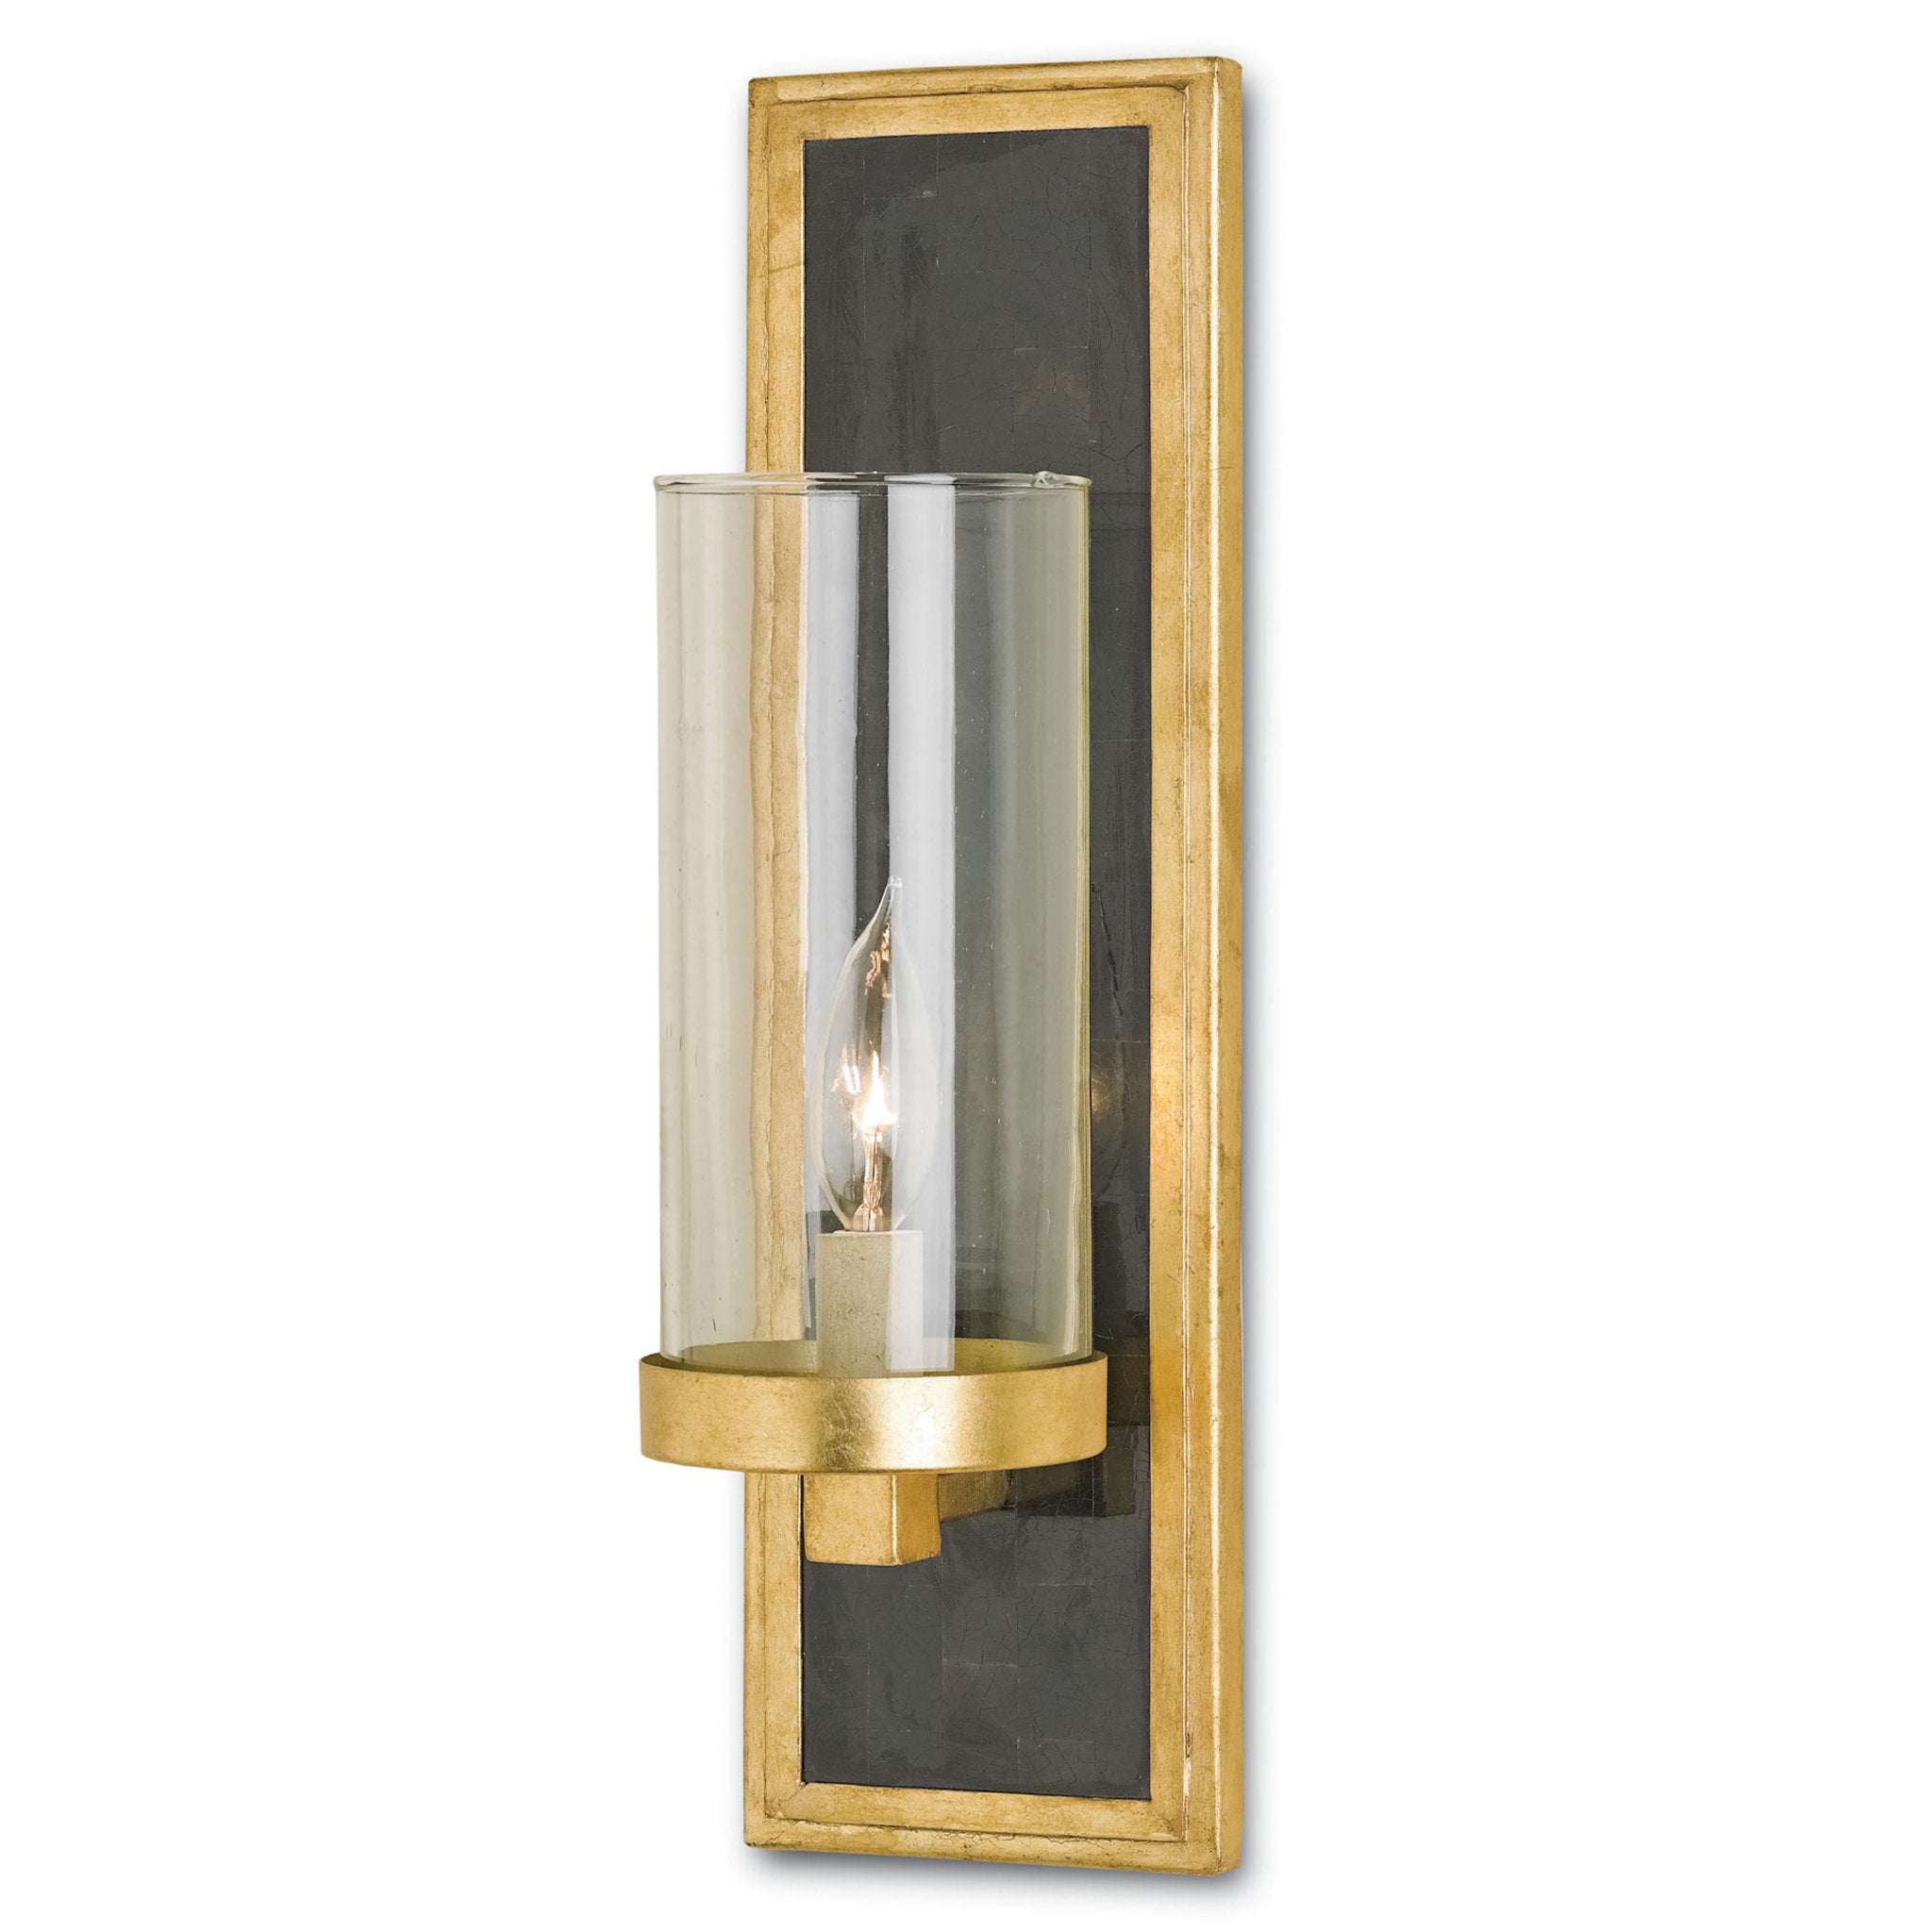 Charade Gold Wall Sconce - Contemporary Gold Leaf/Black Penshell Crackle